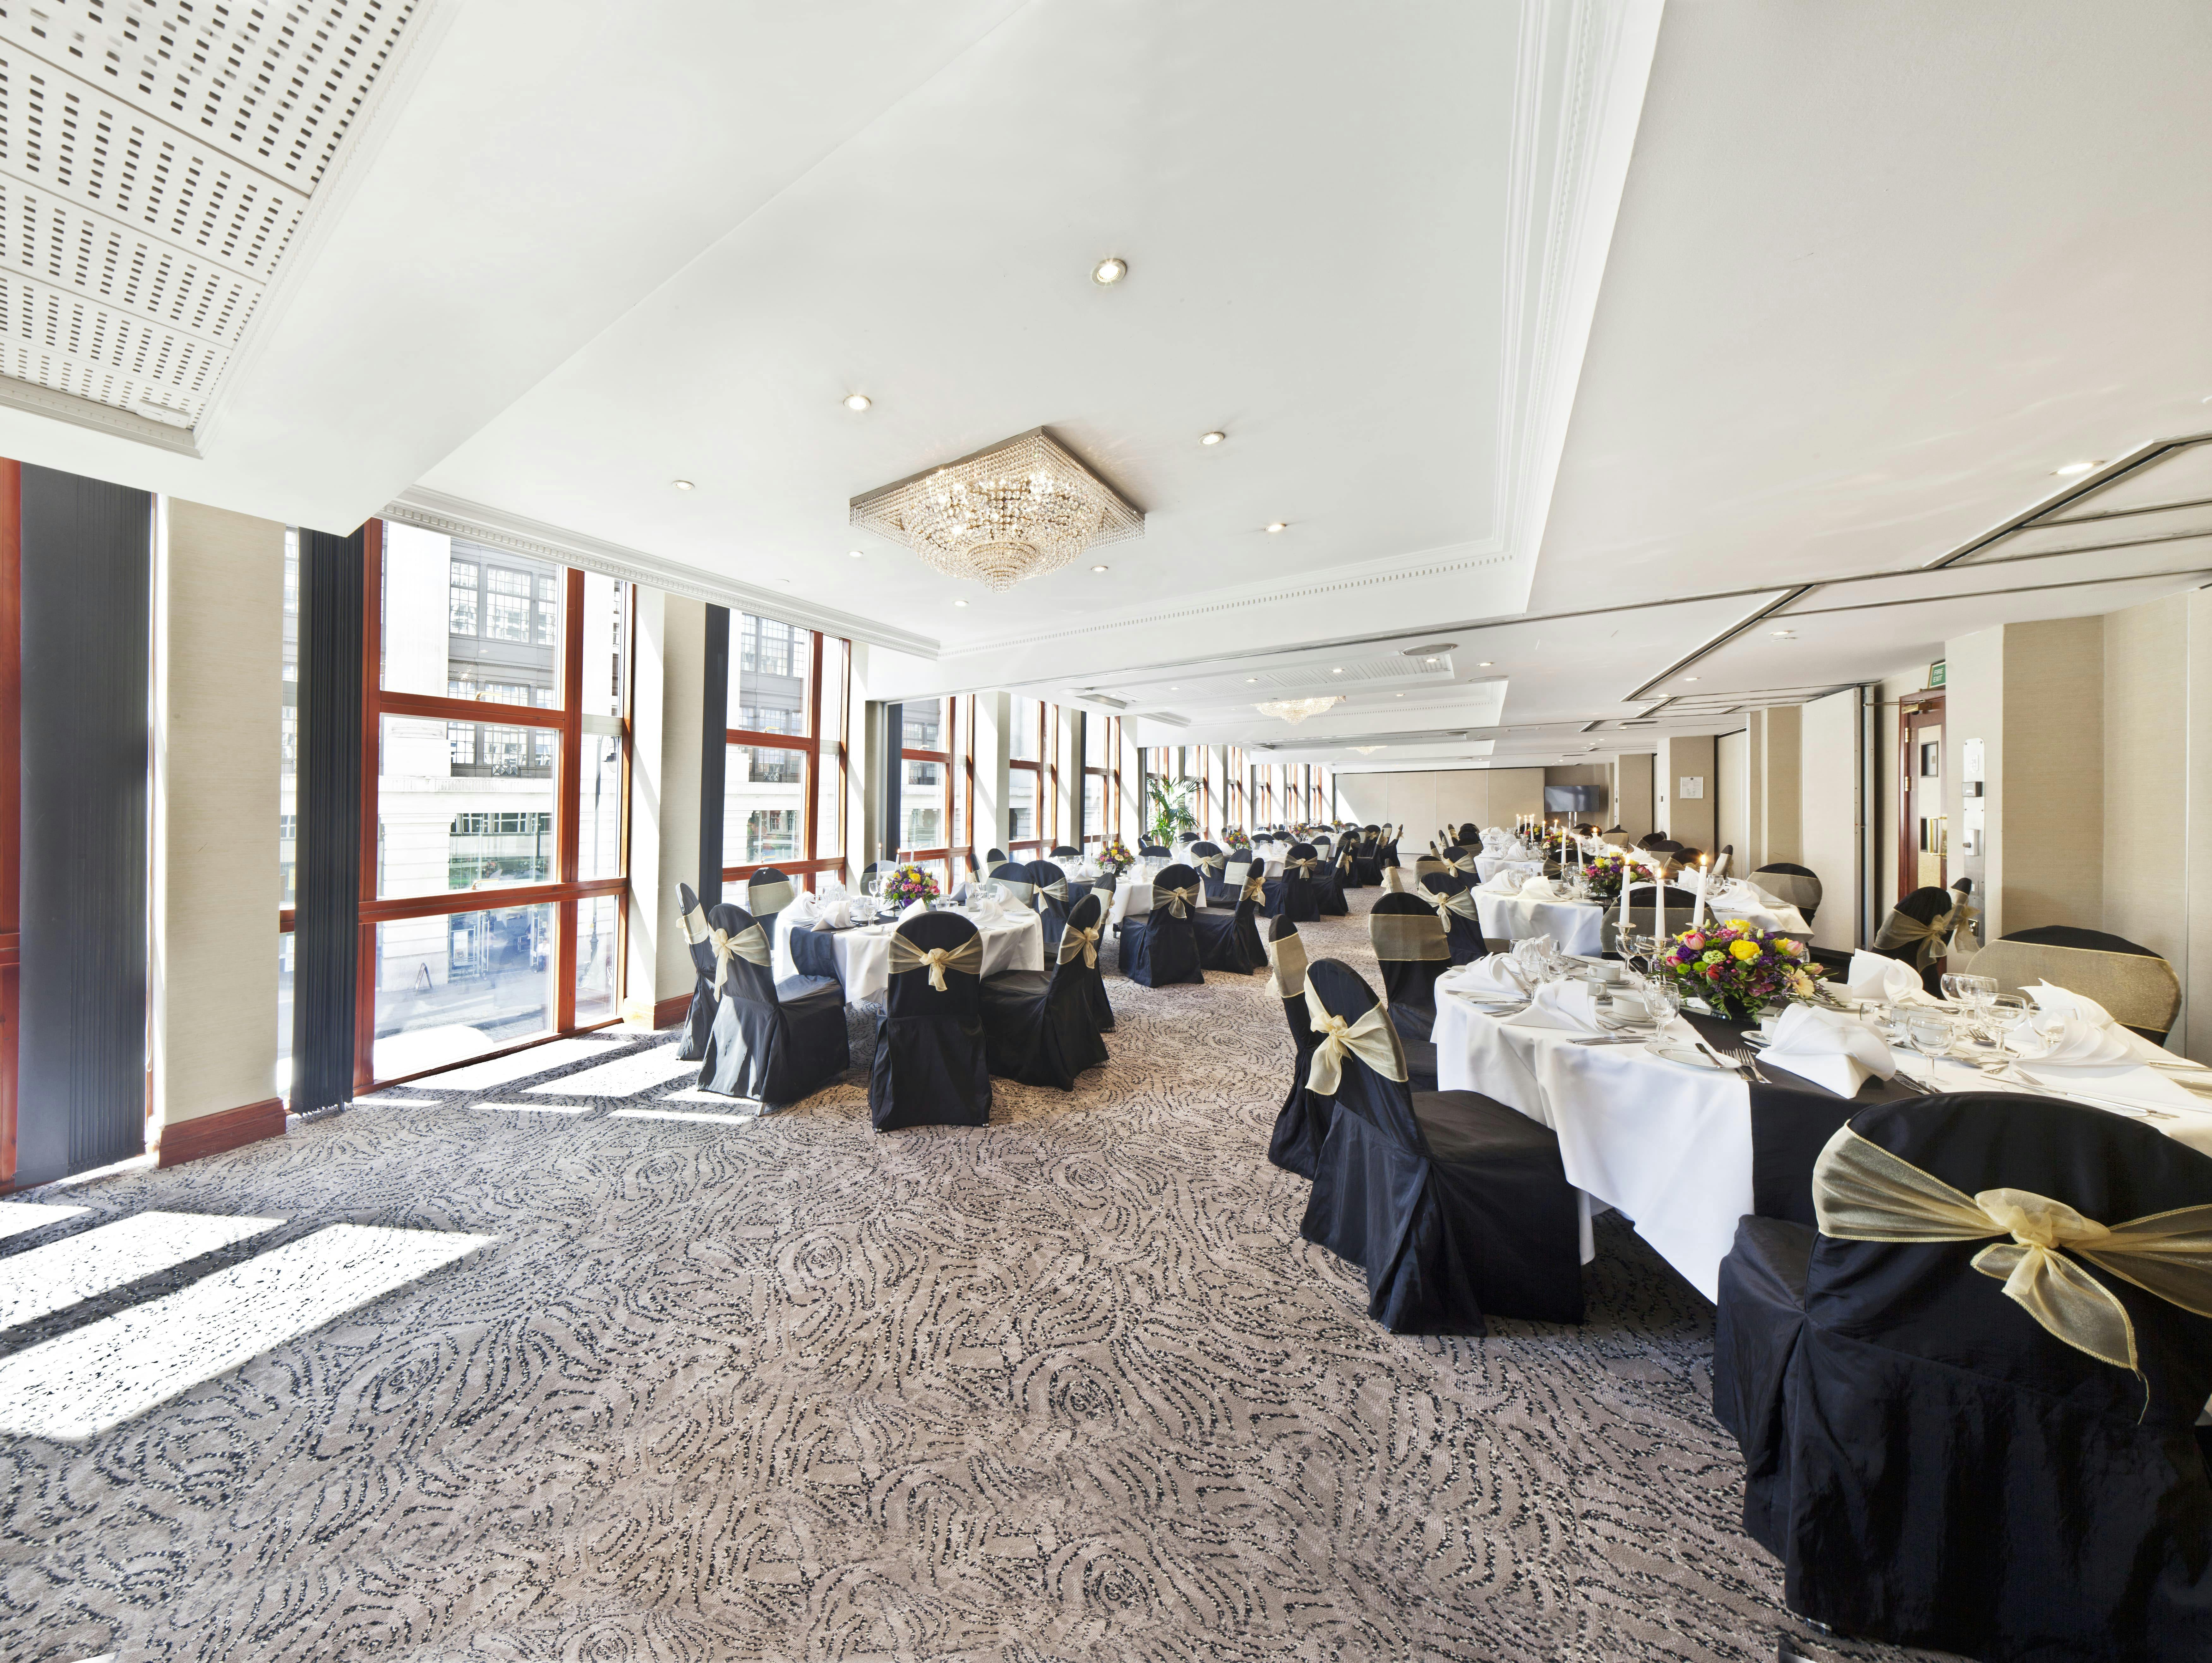 Hotel Conference Venues - Jurys Inn London Holborn - Events in Orion Suite - Banner